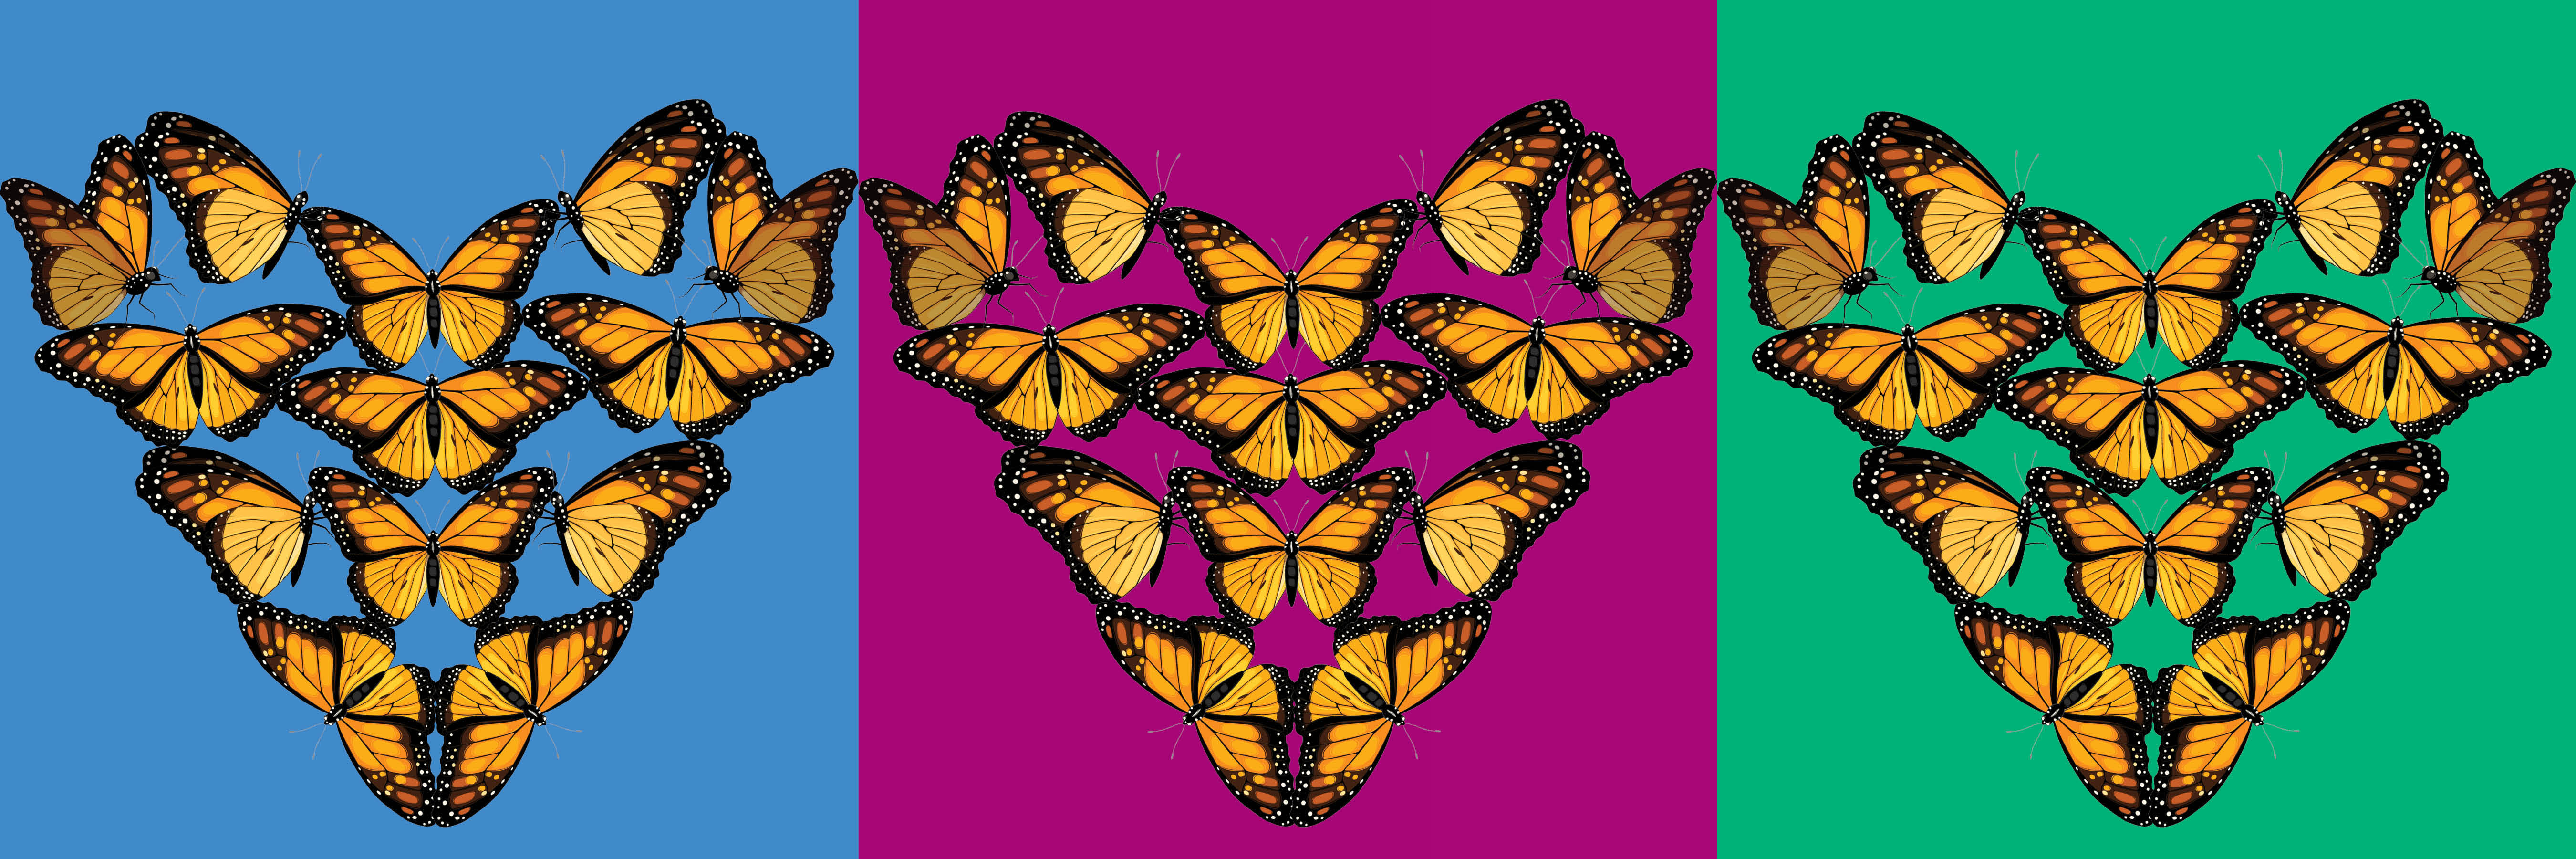 Three hearts made of orange and black monarch butterflies arranged in a row, on first a blue, then magenta, and green backgrounds.